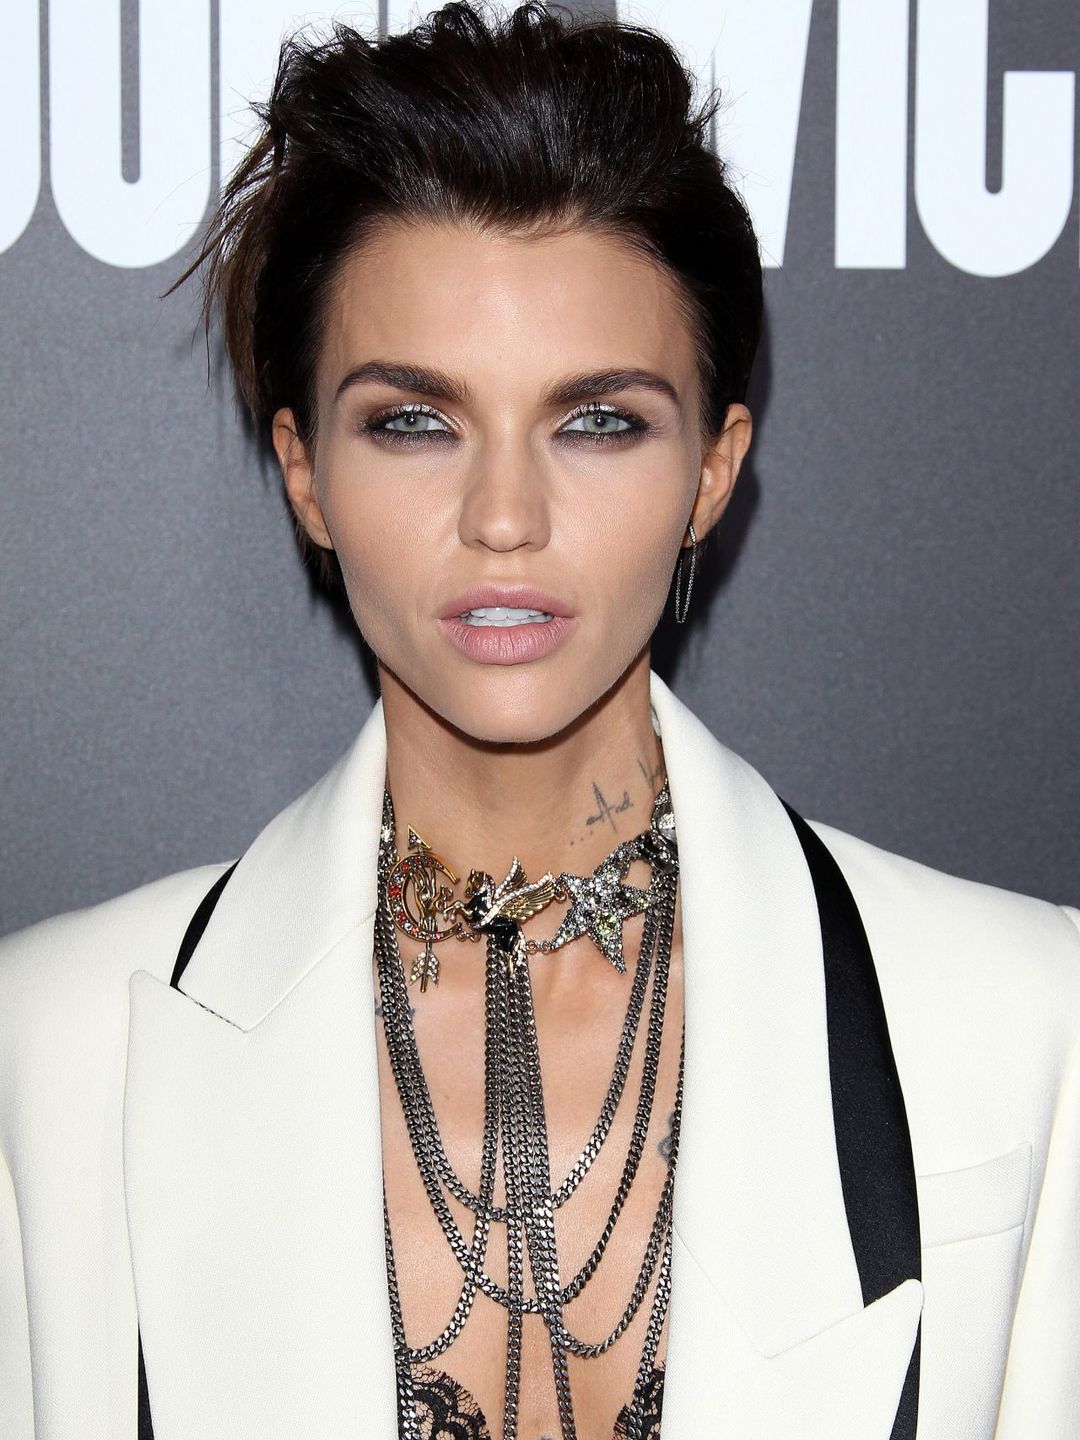 Ruby Rose early childhood